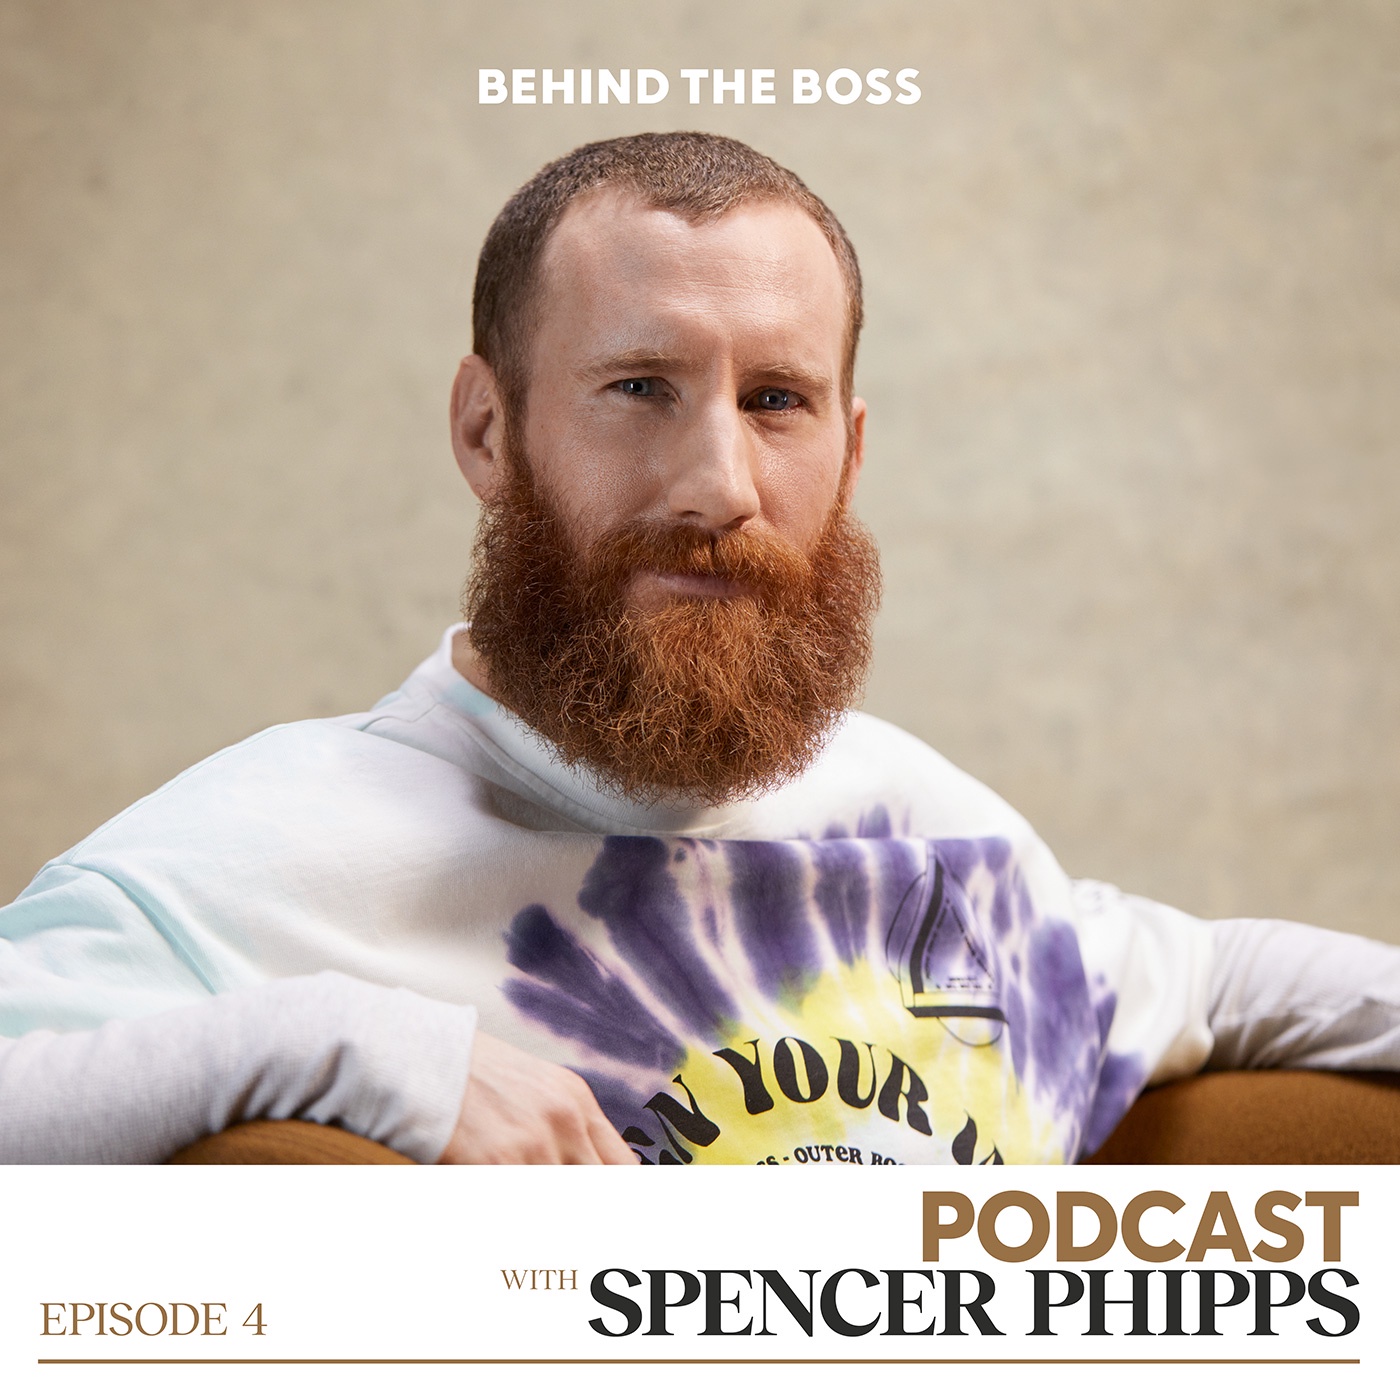 Behind the BOSS with Spencer Phipps